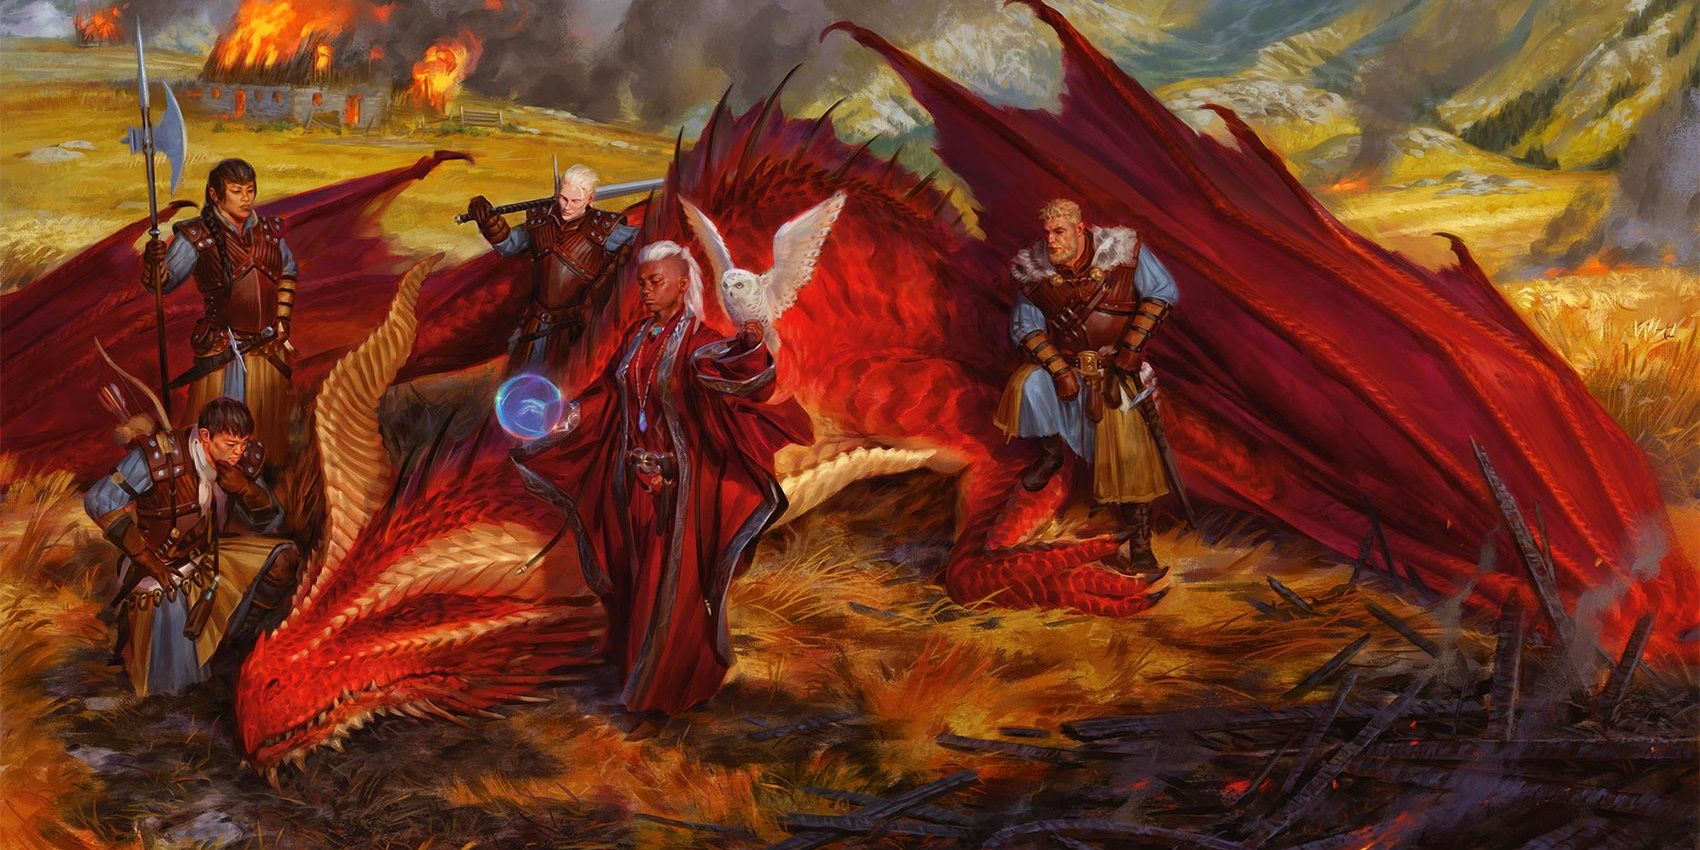 Characters surround a downed red dragon in Dungeons & Dragon's campaign Dragonlance.